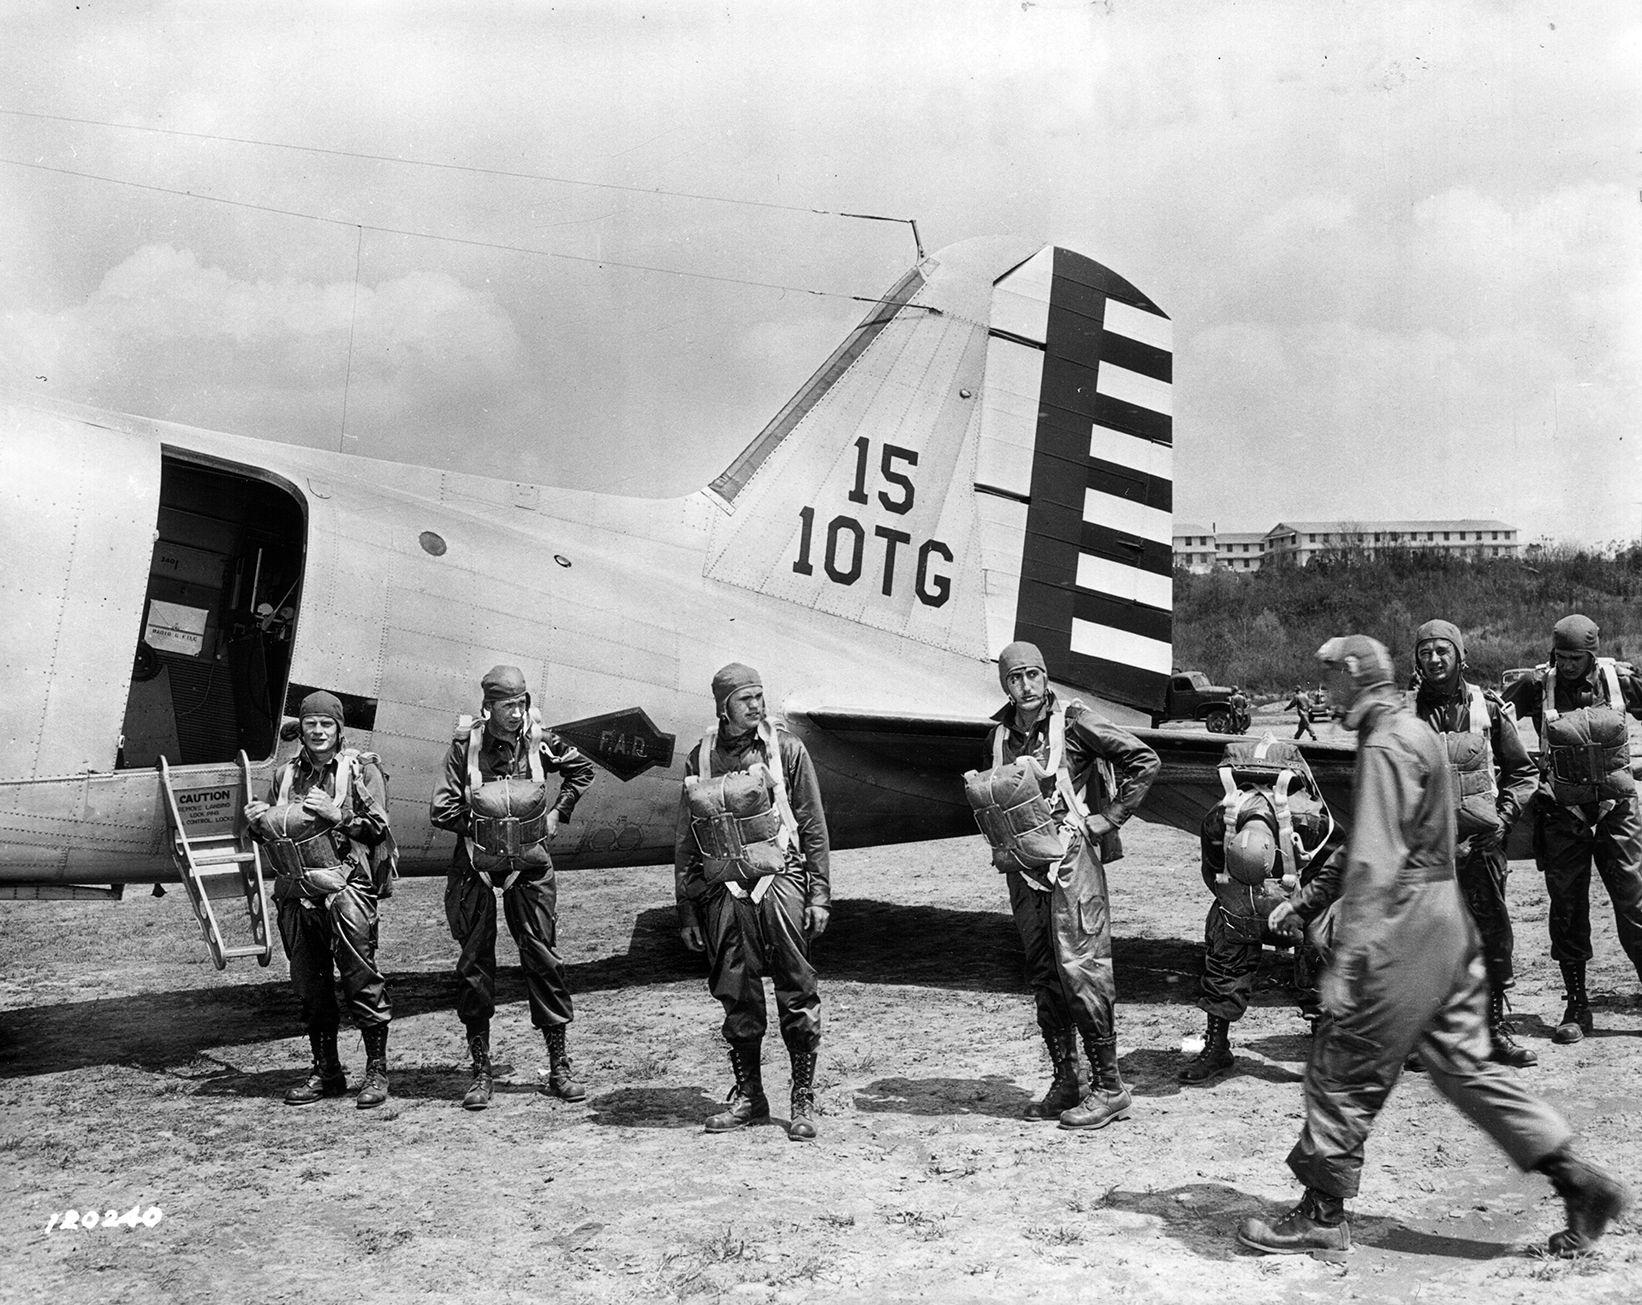 Paratroopers line up to board their transport plane for a practice jump at Lawson Field, near Fort Benning, Georgia. This jump took place in April 1941, eight months before the United States entered World War II.